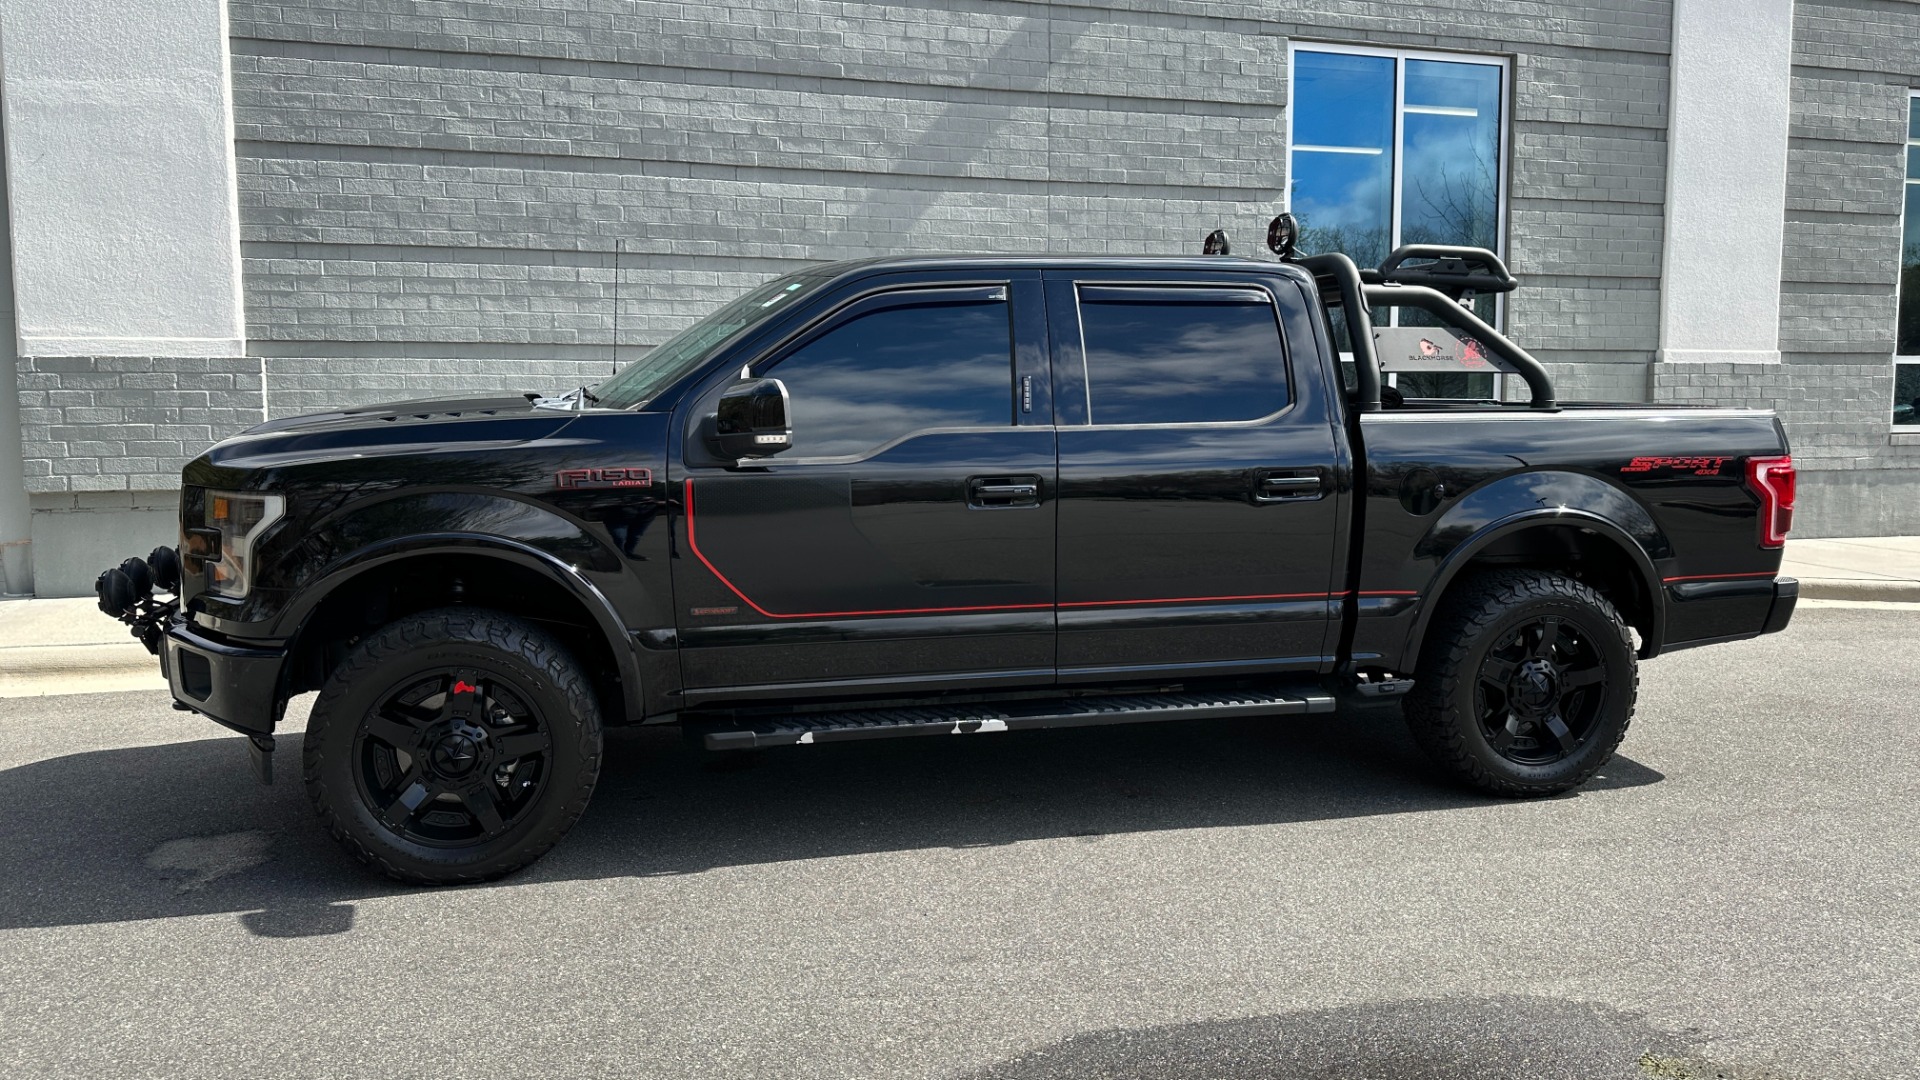 Used 2017 Ford F-150 LARIAT / SPORT EDITION / 4X4 / CREW CAB / UPGRADED WHEELS / BUMPERS / LIGHT for sale Sold at Formula Imports in Charlotte NC 28227 3